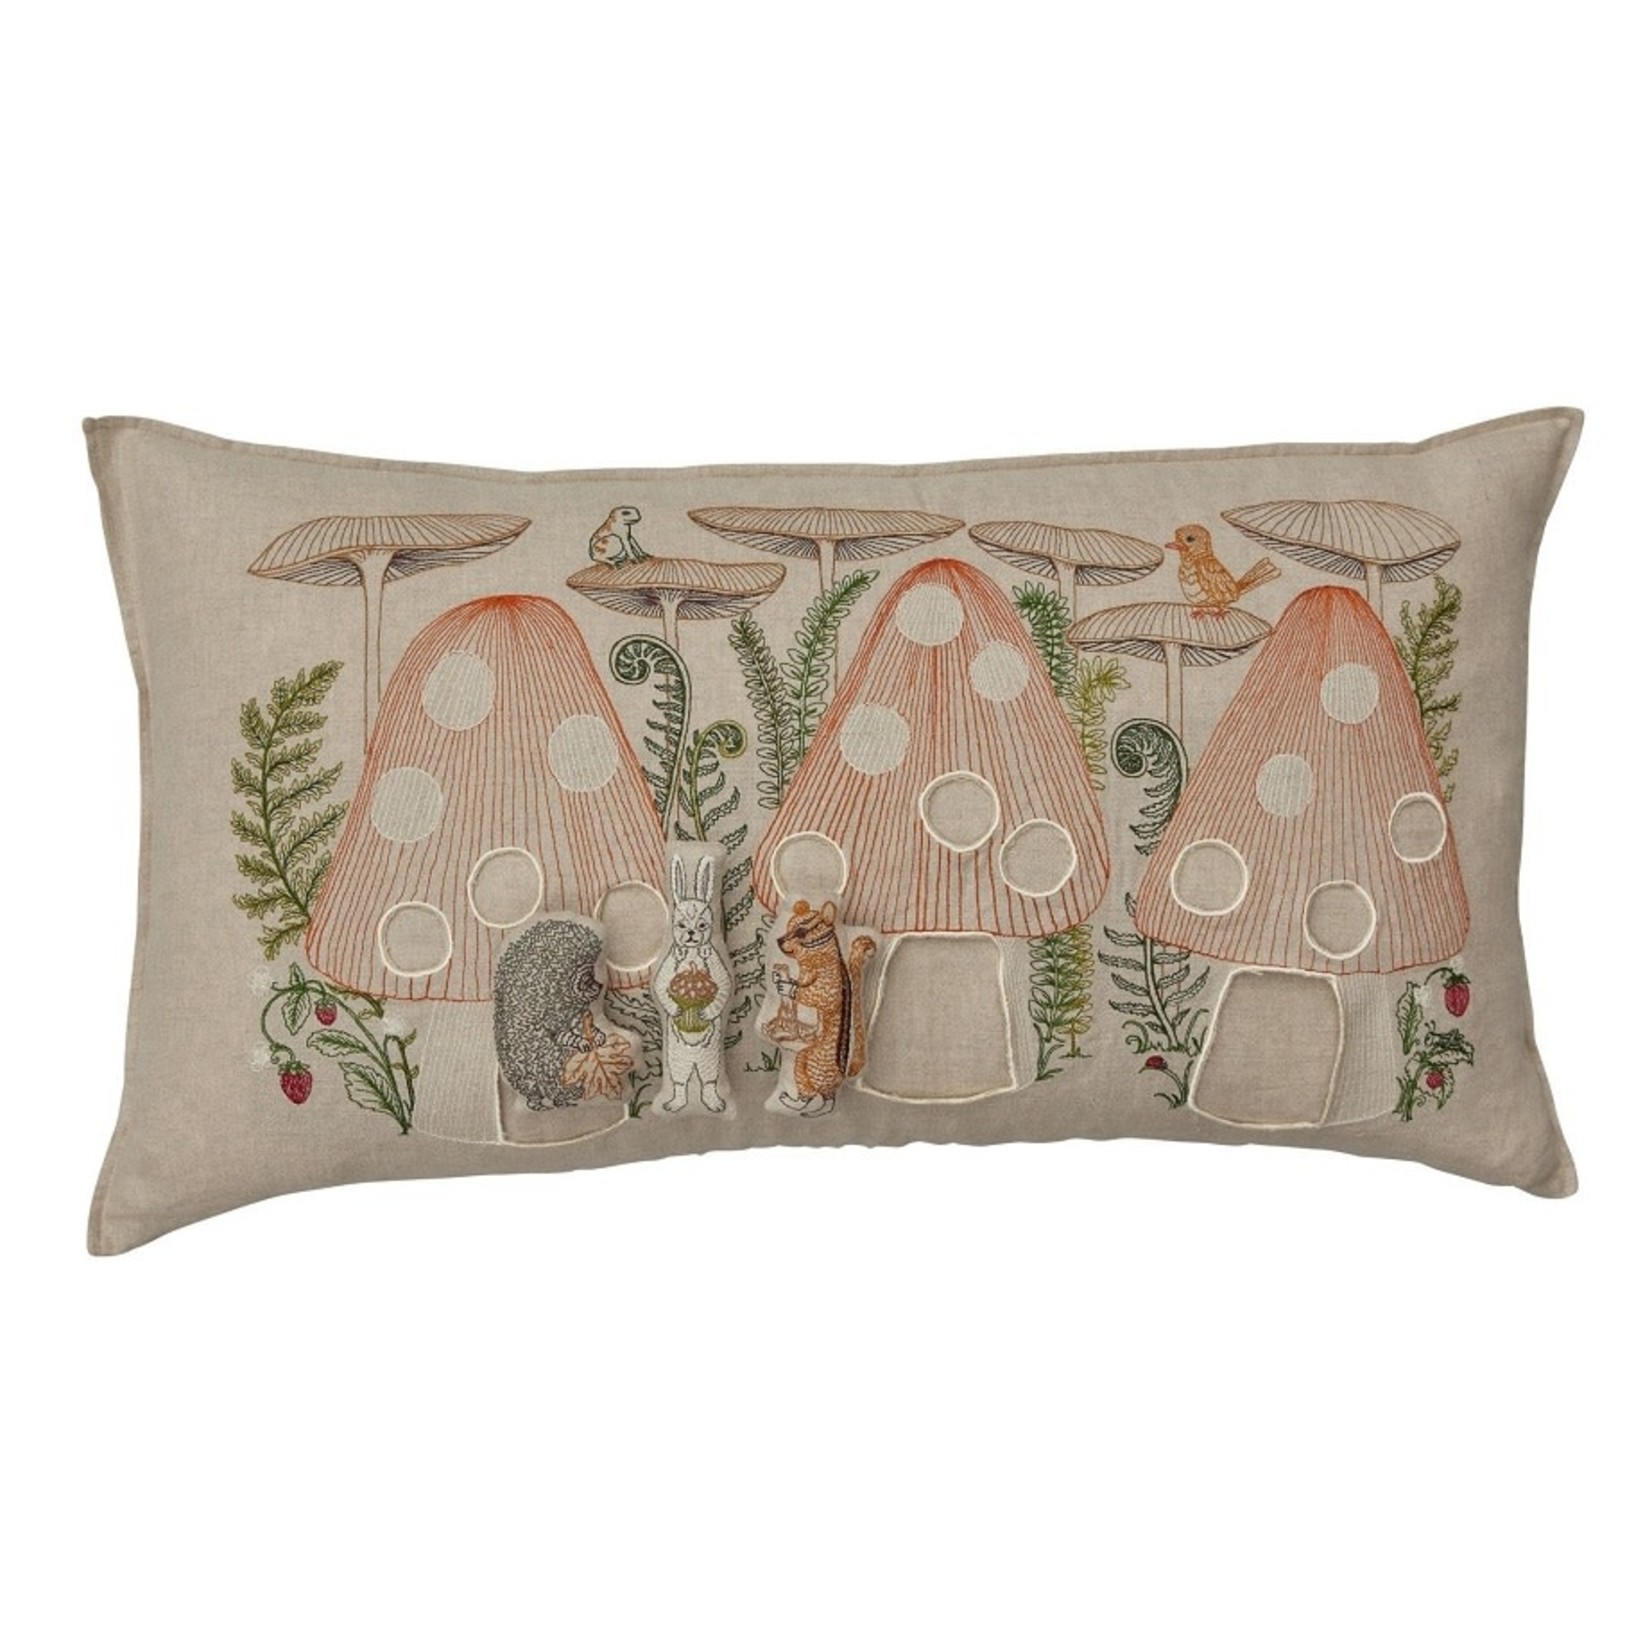 Pillows - Embroidered Mushroom House Forest